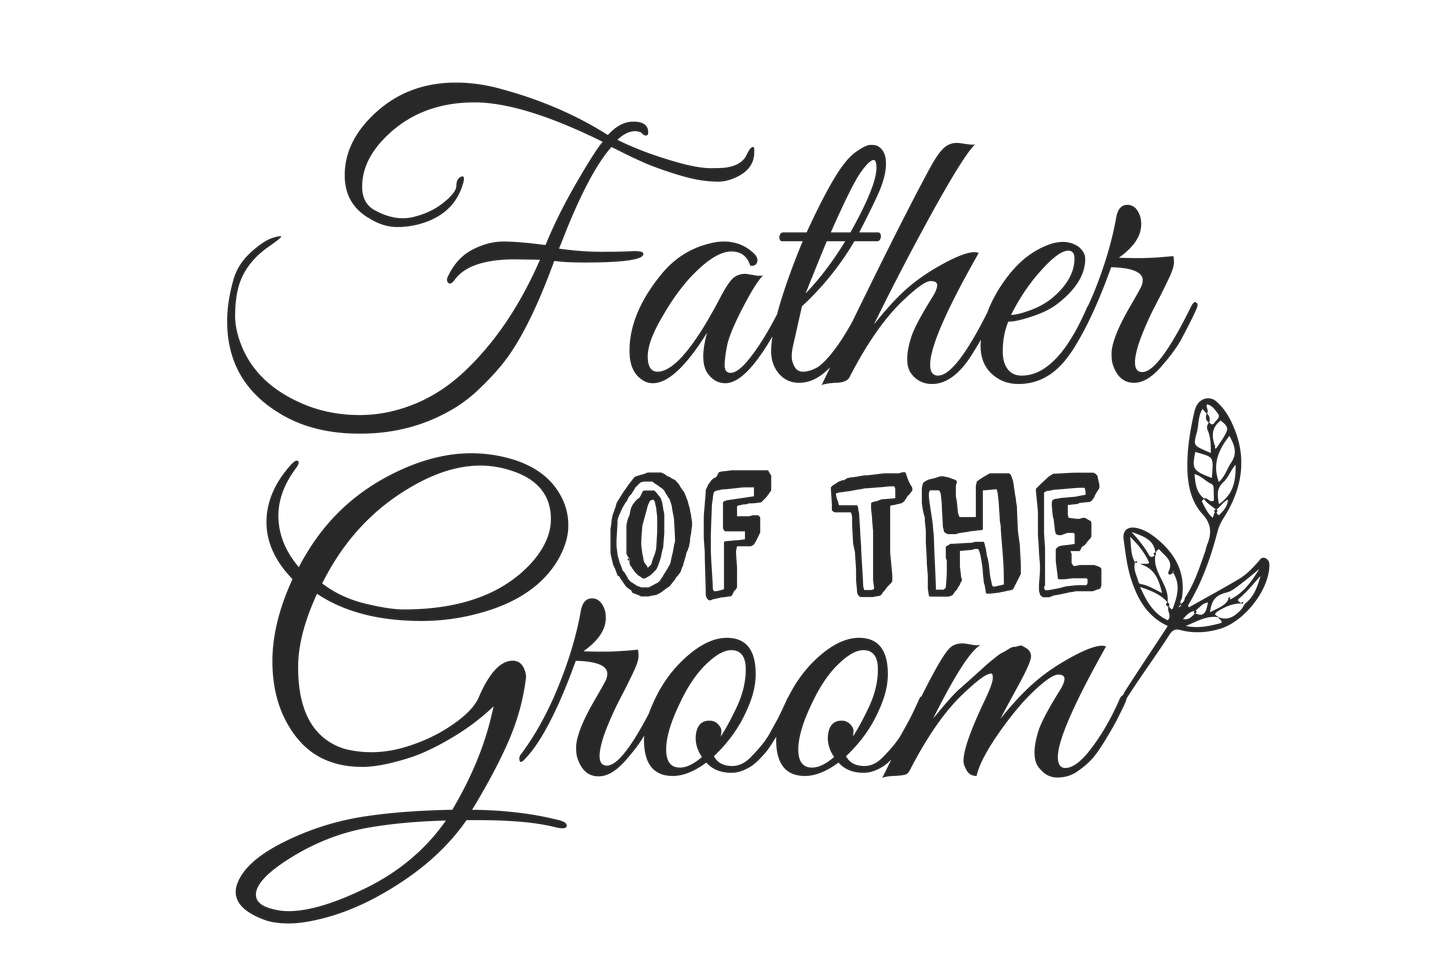 FATHER OF GROOM